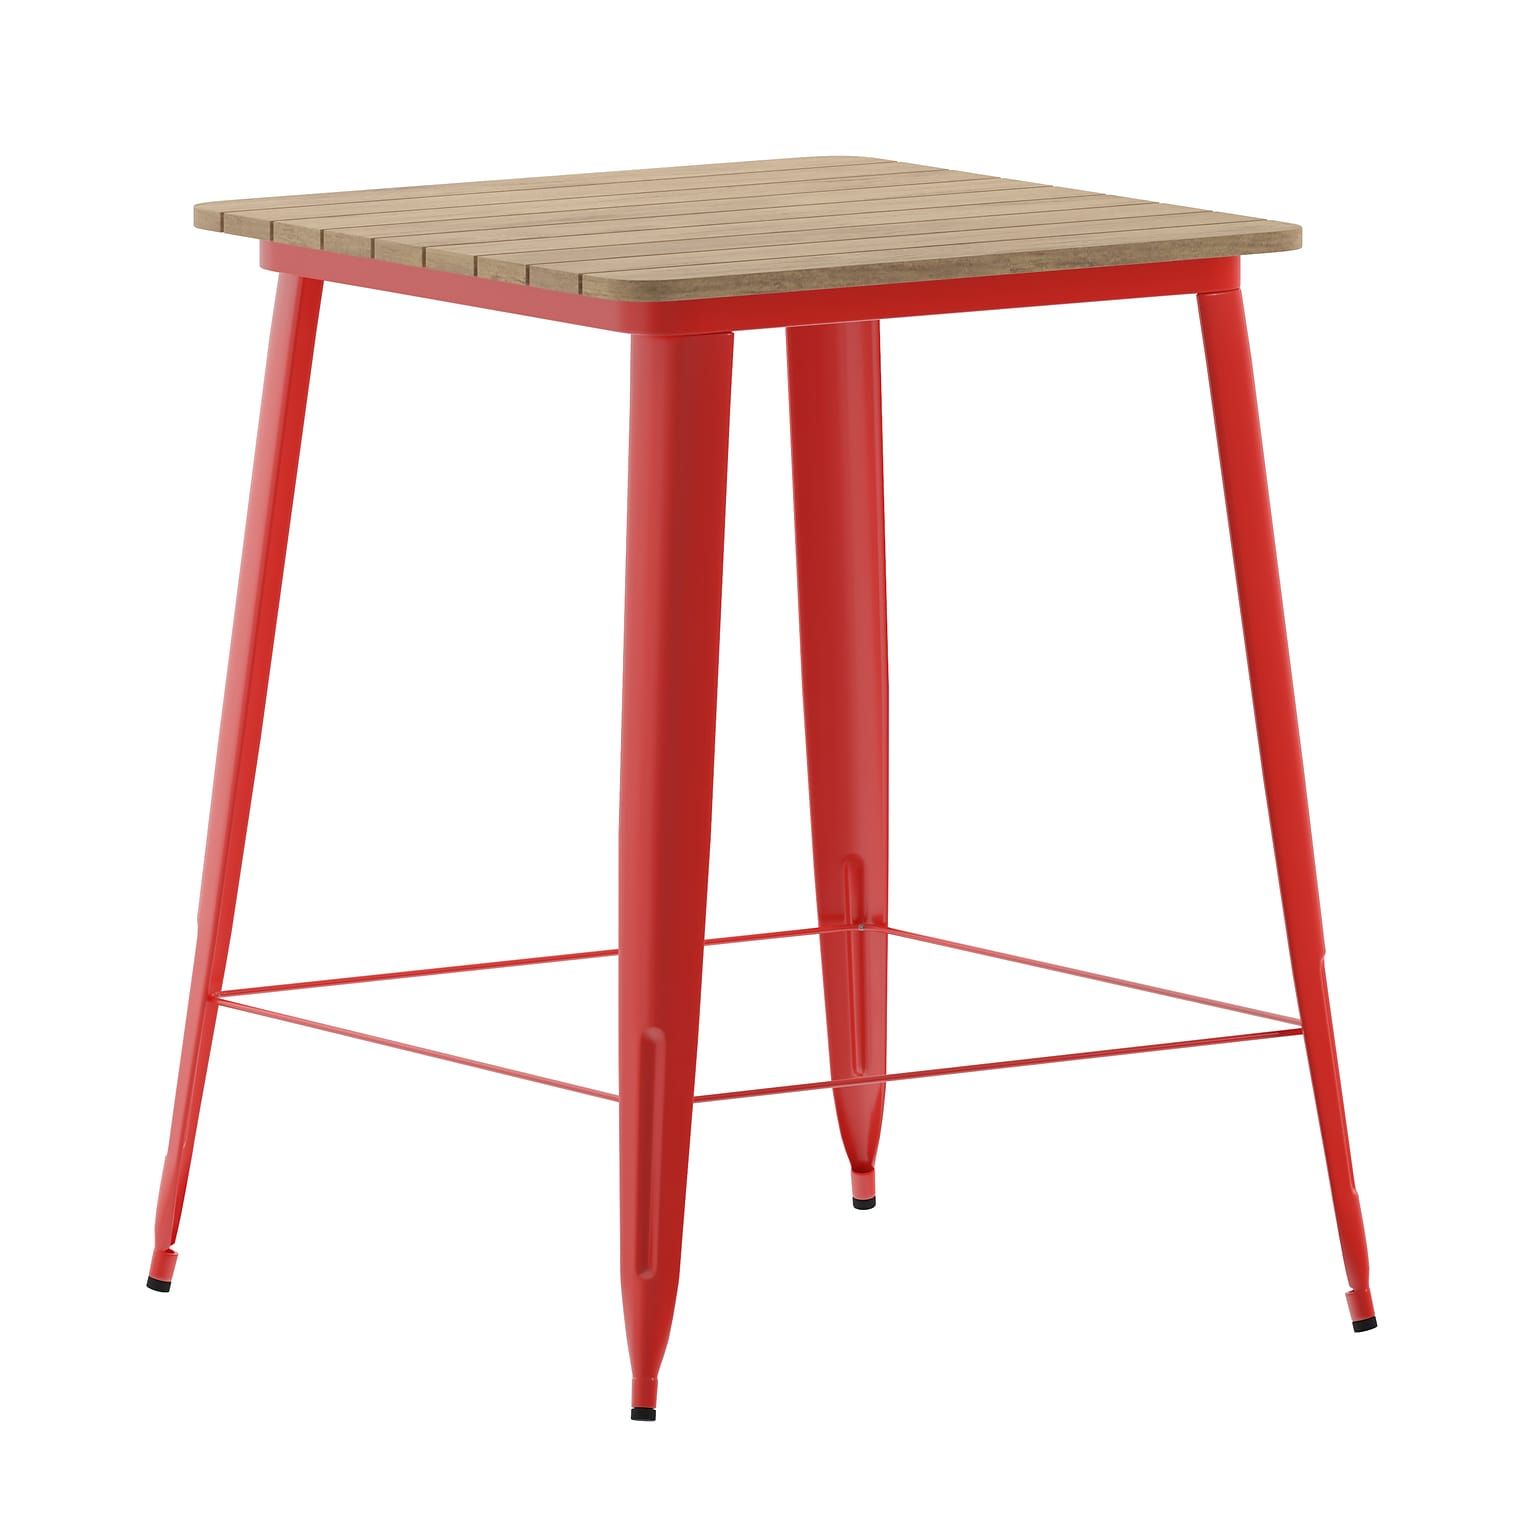 Flash Furniture Declan Indoor/Outdoor Bar Top Table, 42, Brown Top with Red Base (JJT14619H80BRRD)